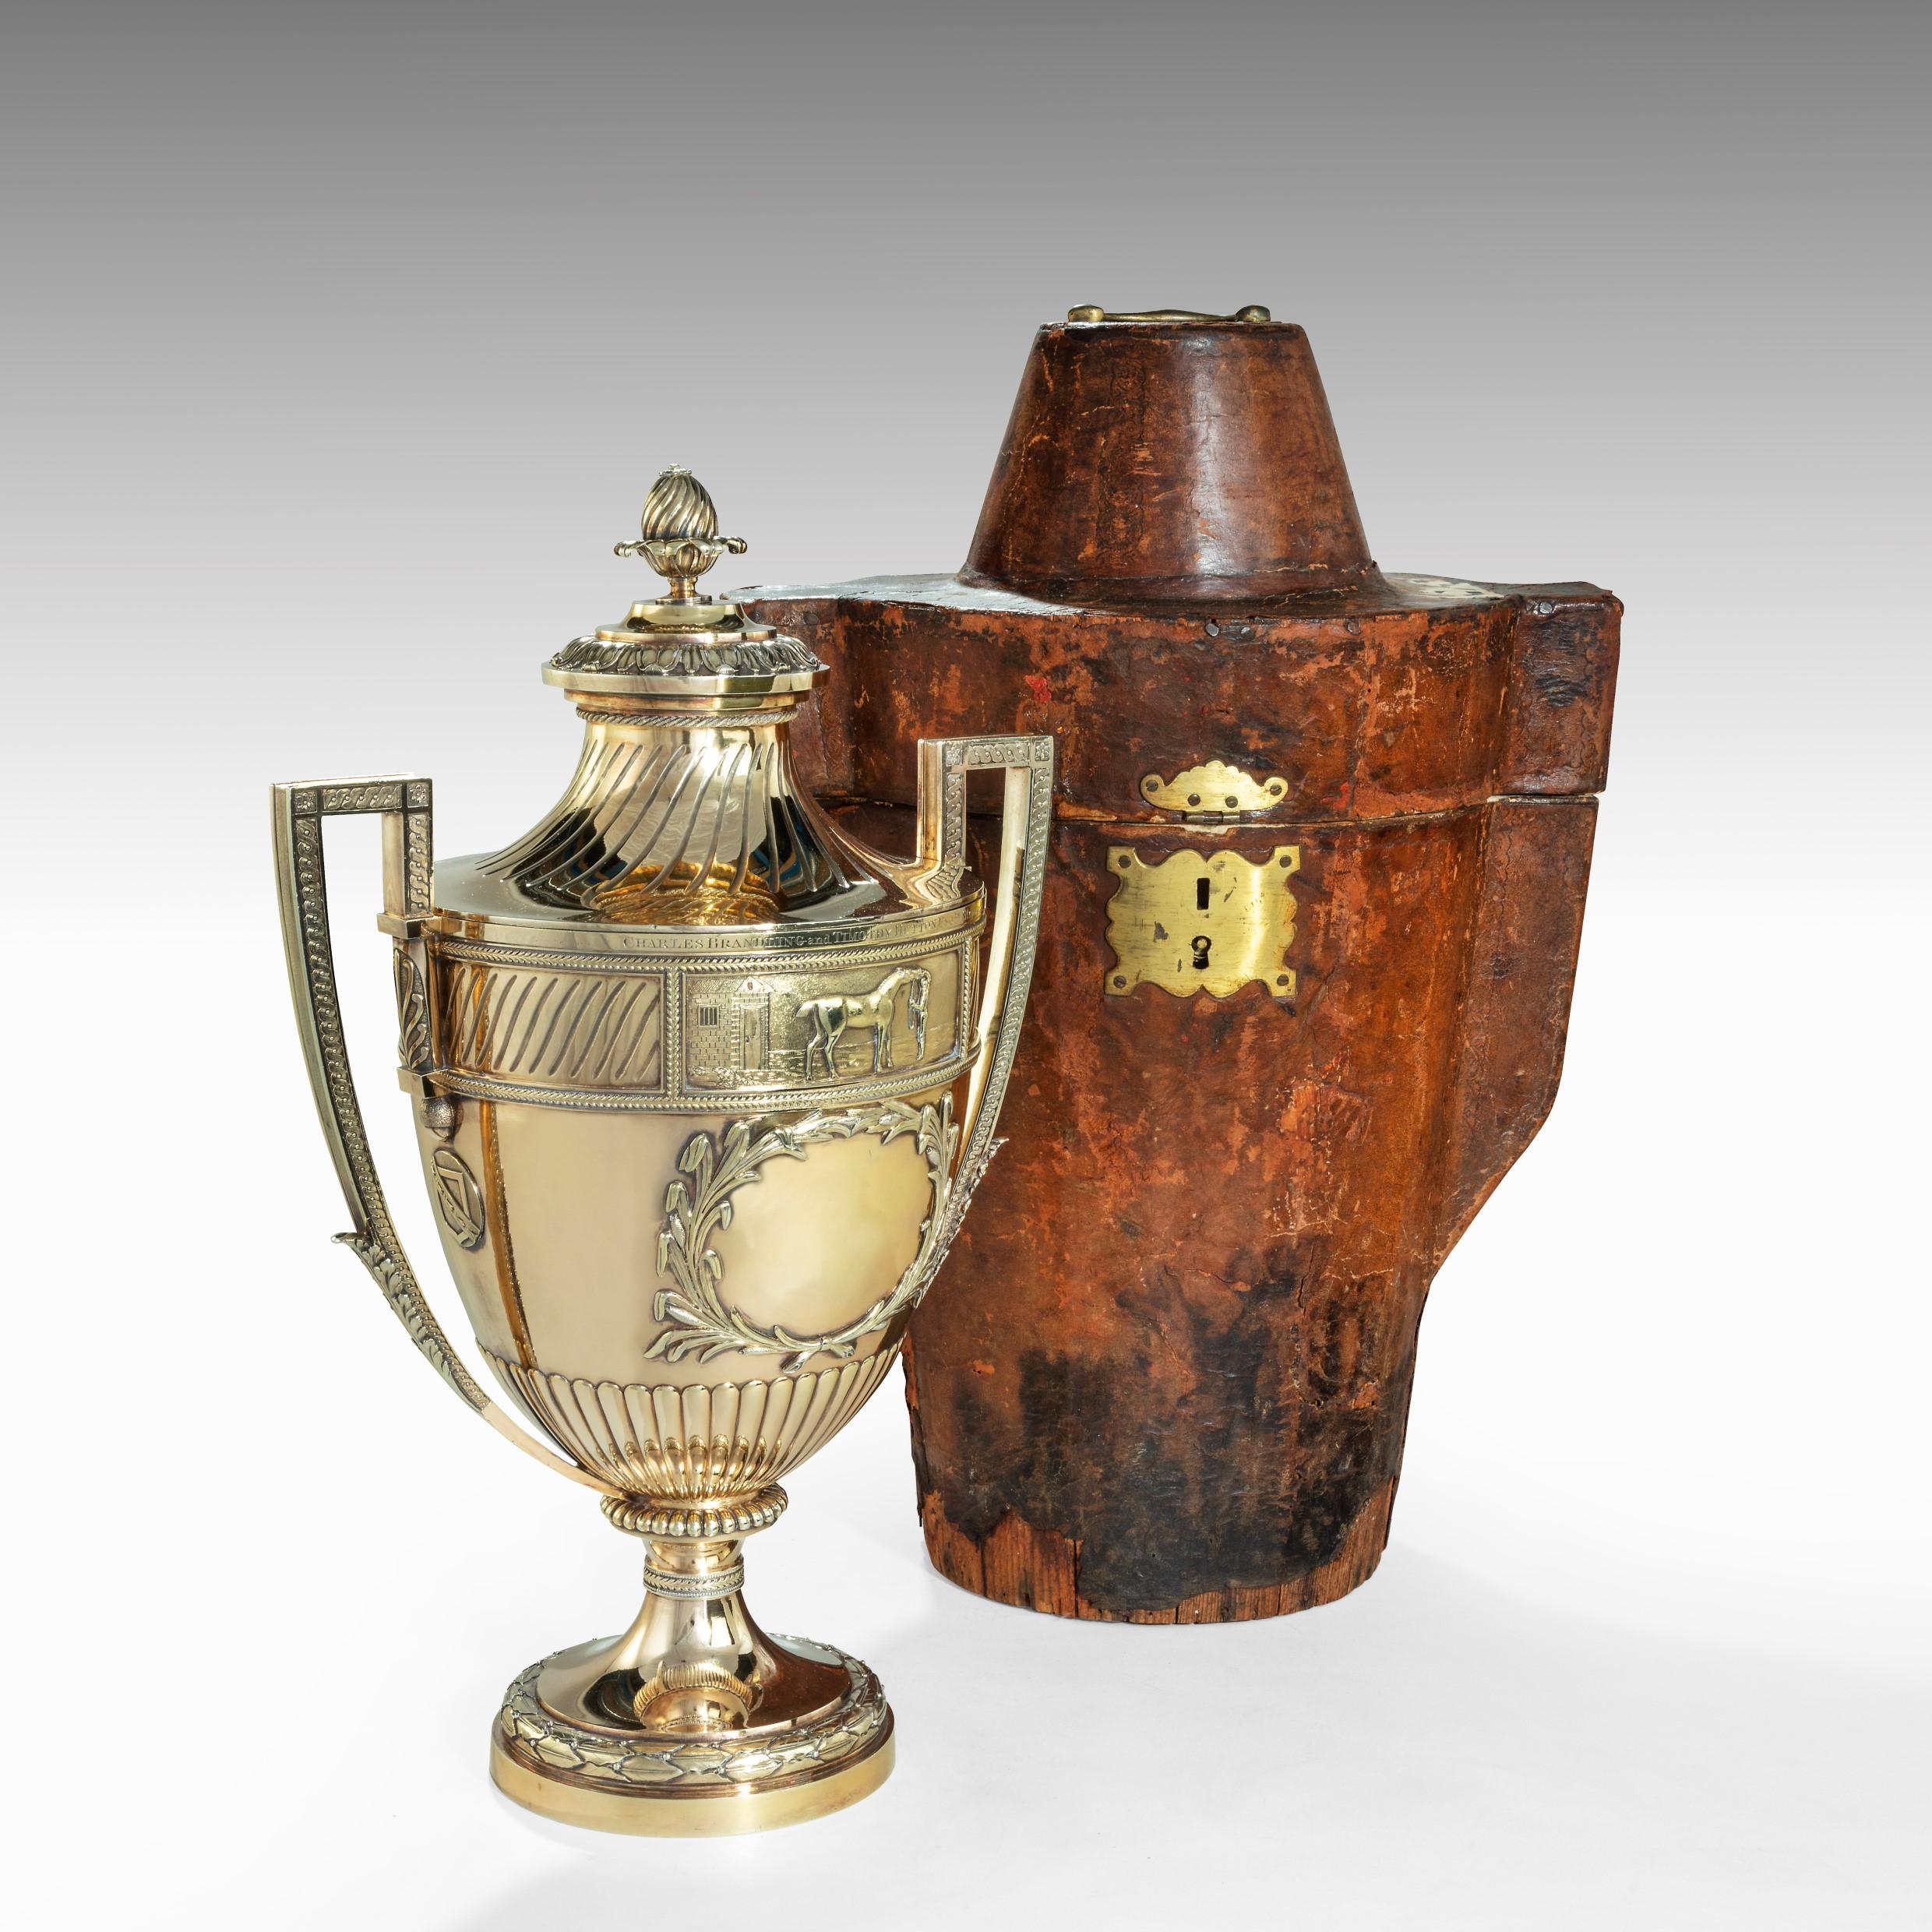 1802, Richmond “Gold Cup”, by Robert Adam, Paul Storr and Robert Makepeace For Sale 7